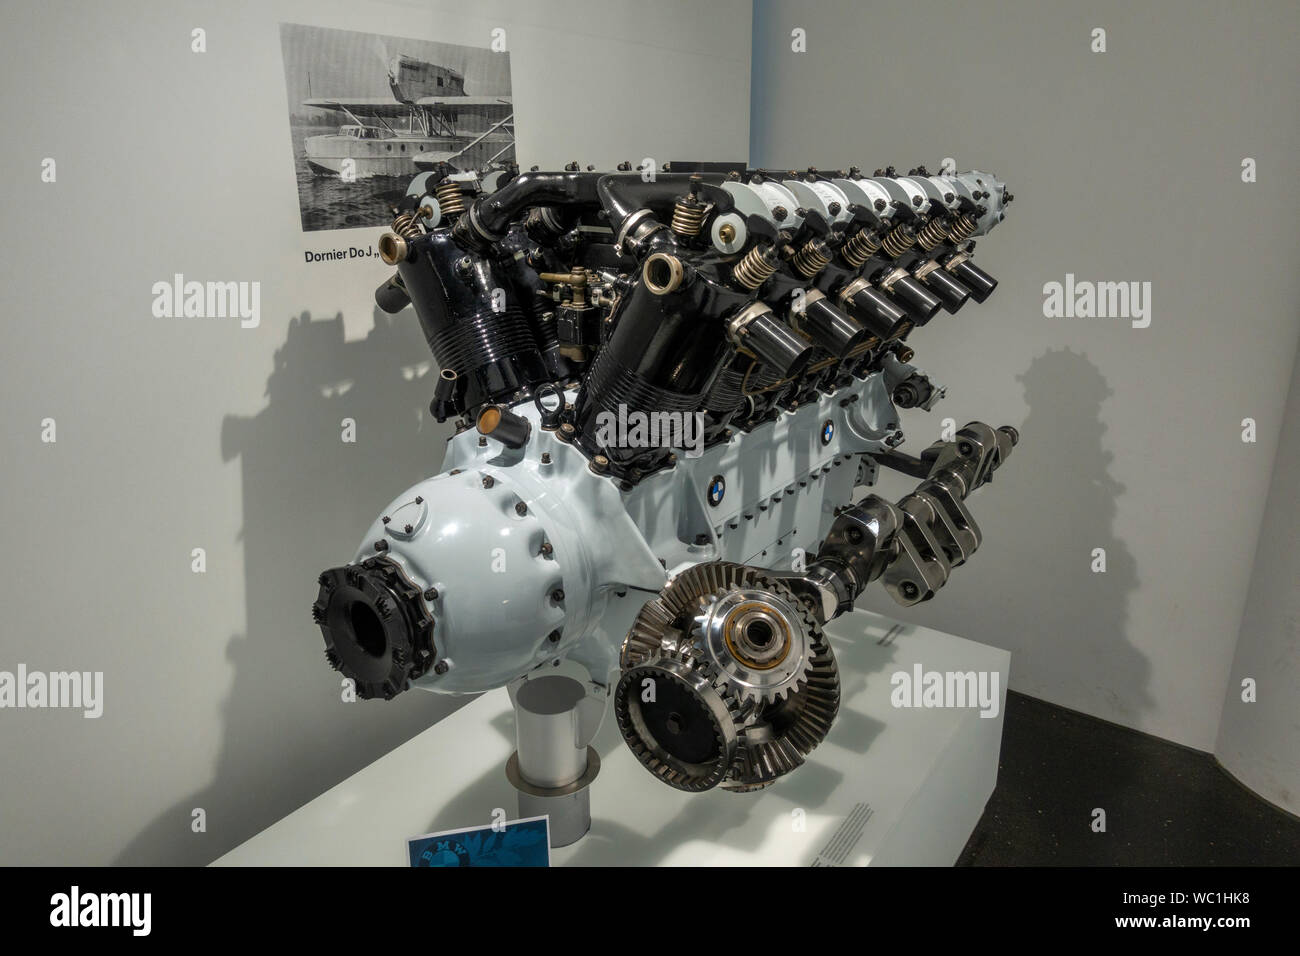 A BMW VI was a water-cooled V-12 aircraft engine built in Germany in the 1920son display in the BMW Museum, Munich, Bavaria, Germany. Stock Photo